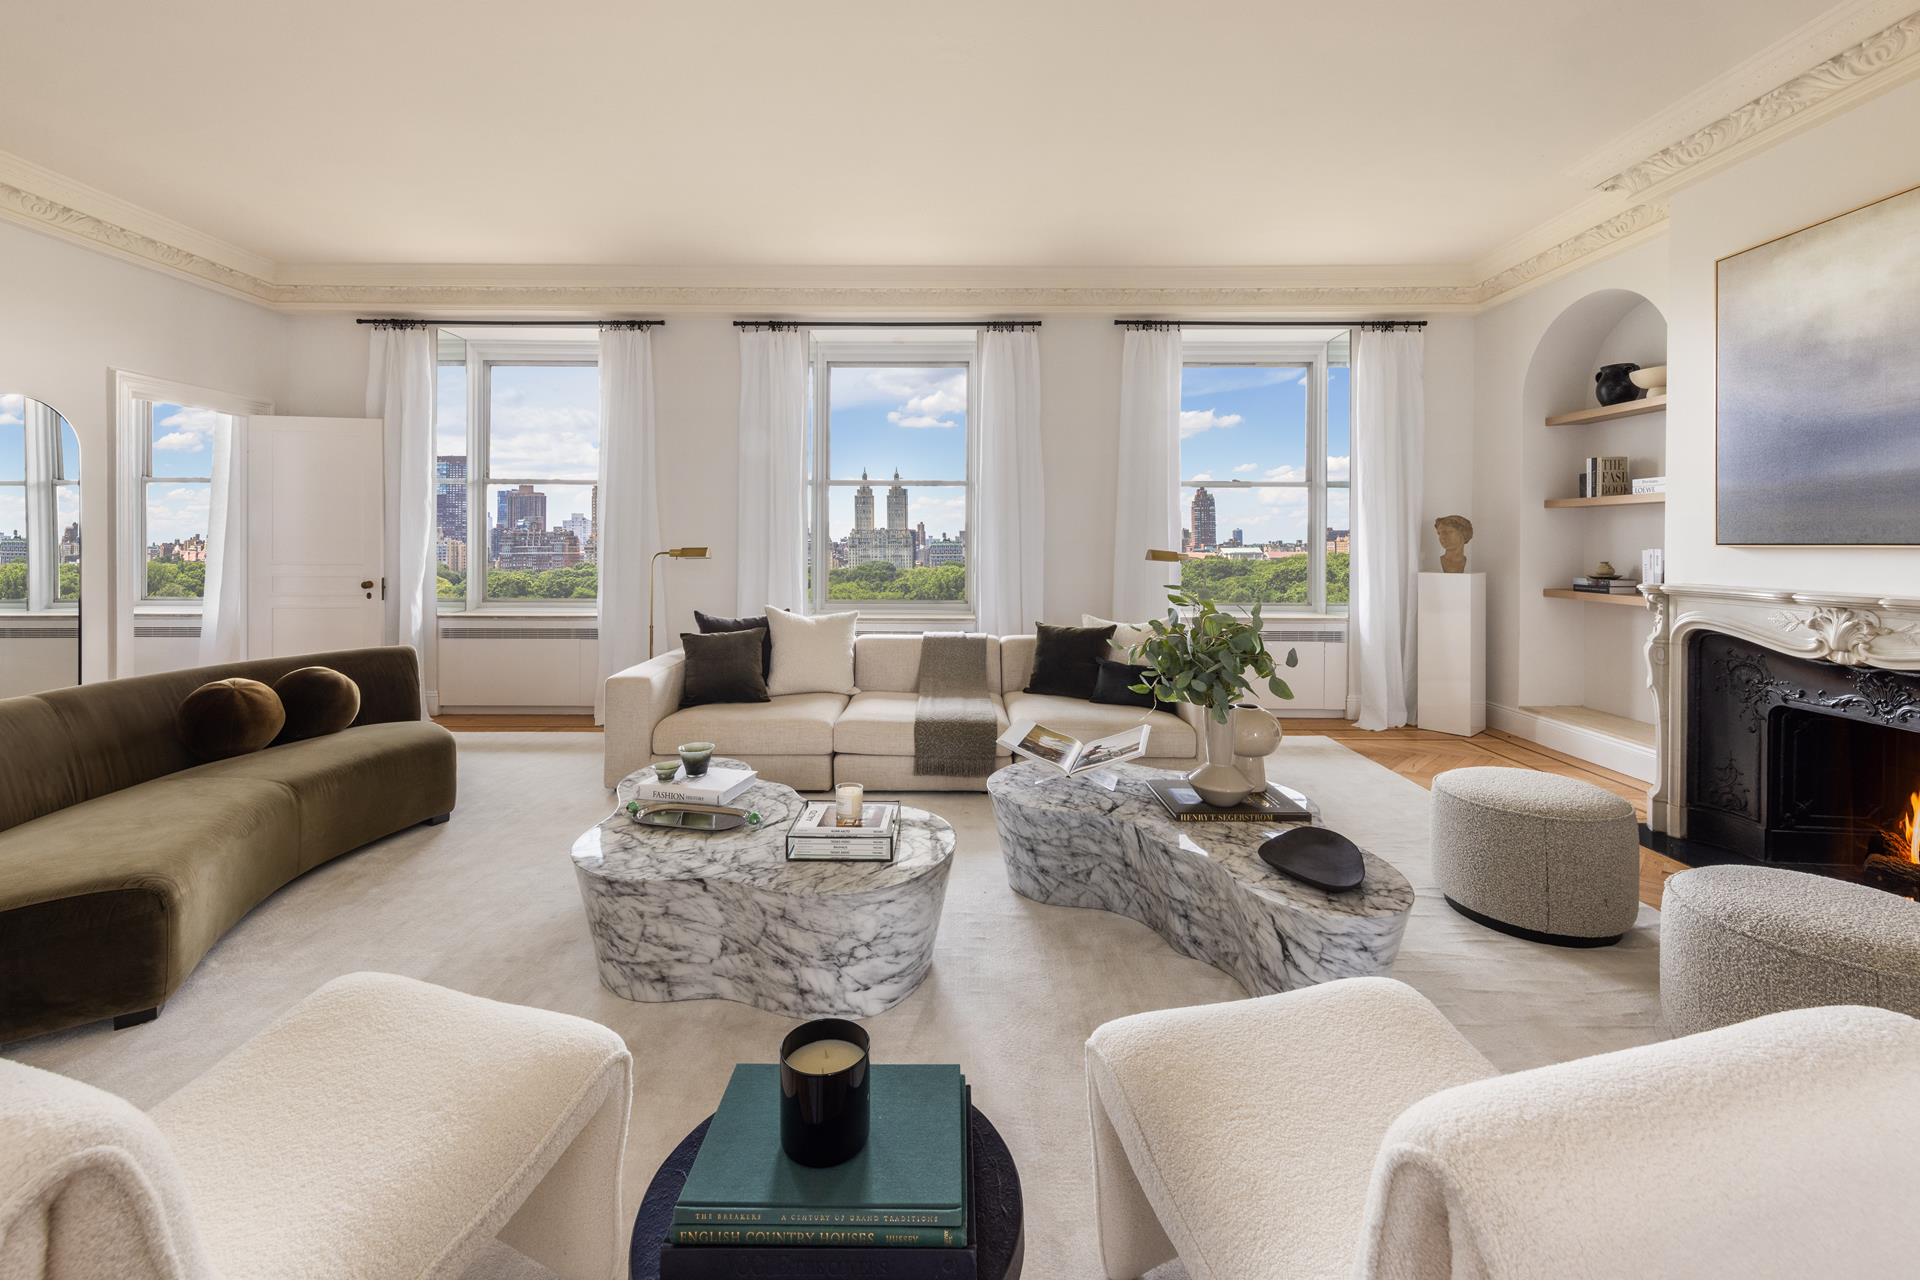 944 5th Avenue 14, Lenox Hill, Upper East Side, NYC - 4 Bedrooms  
6.5 Bathrooms  
12 Rooms - 